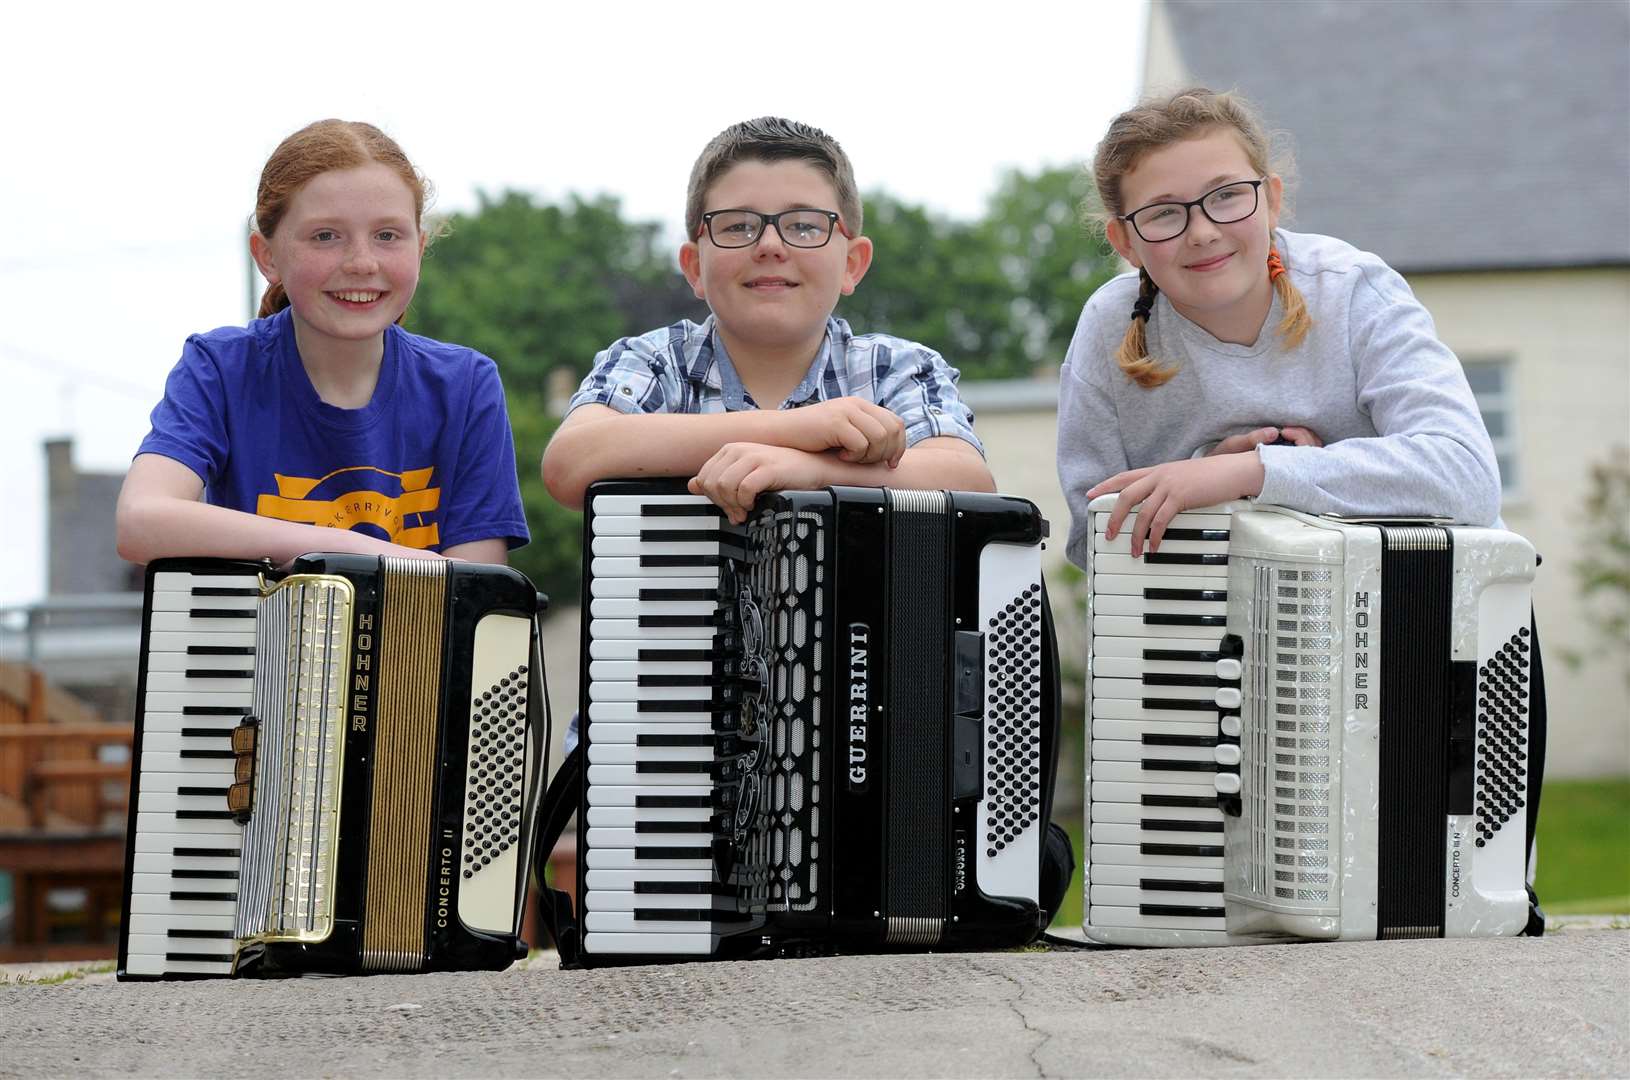 Accordion players, from left, Rachel Low, Fin Hope and Abbie Christie.